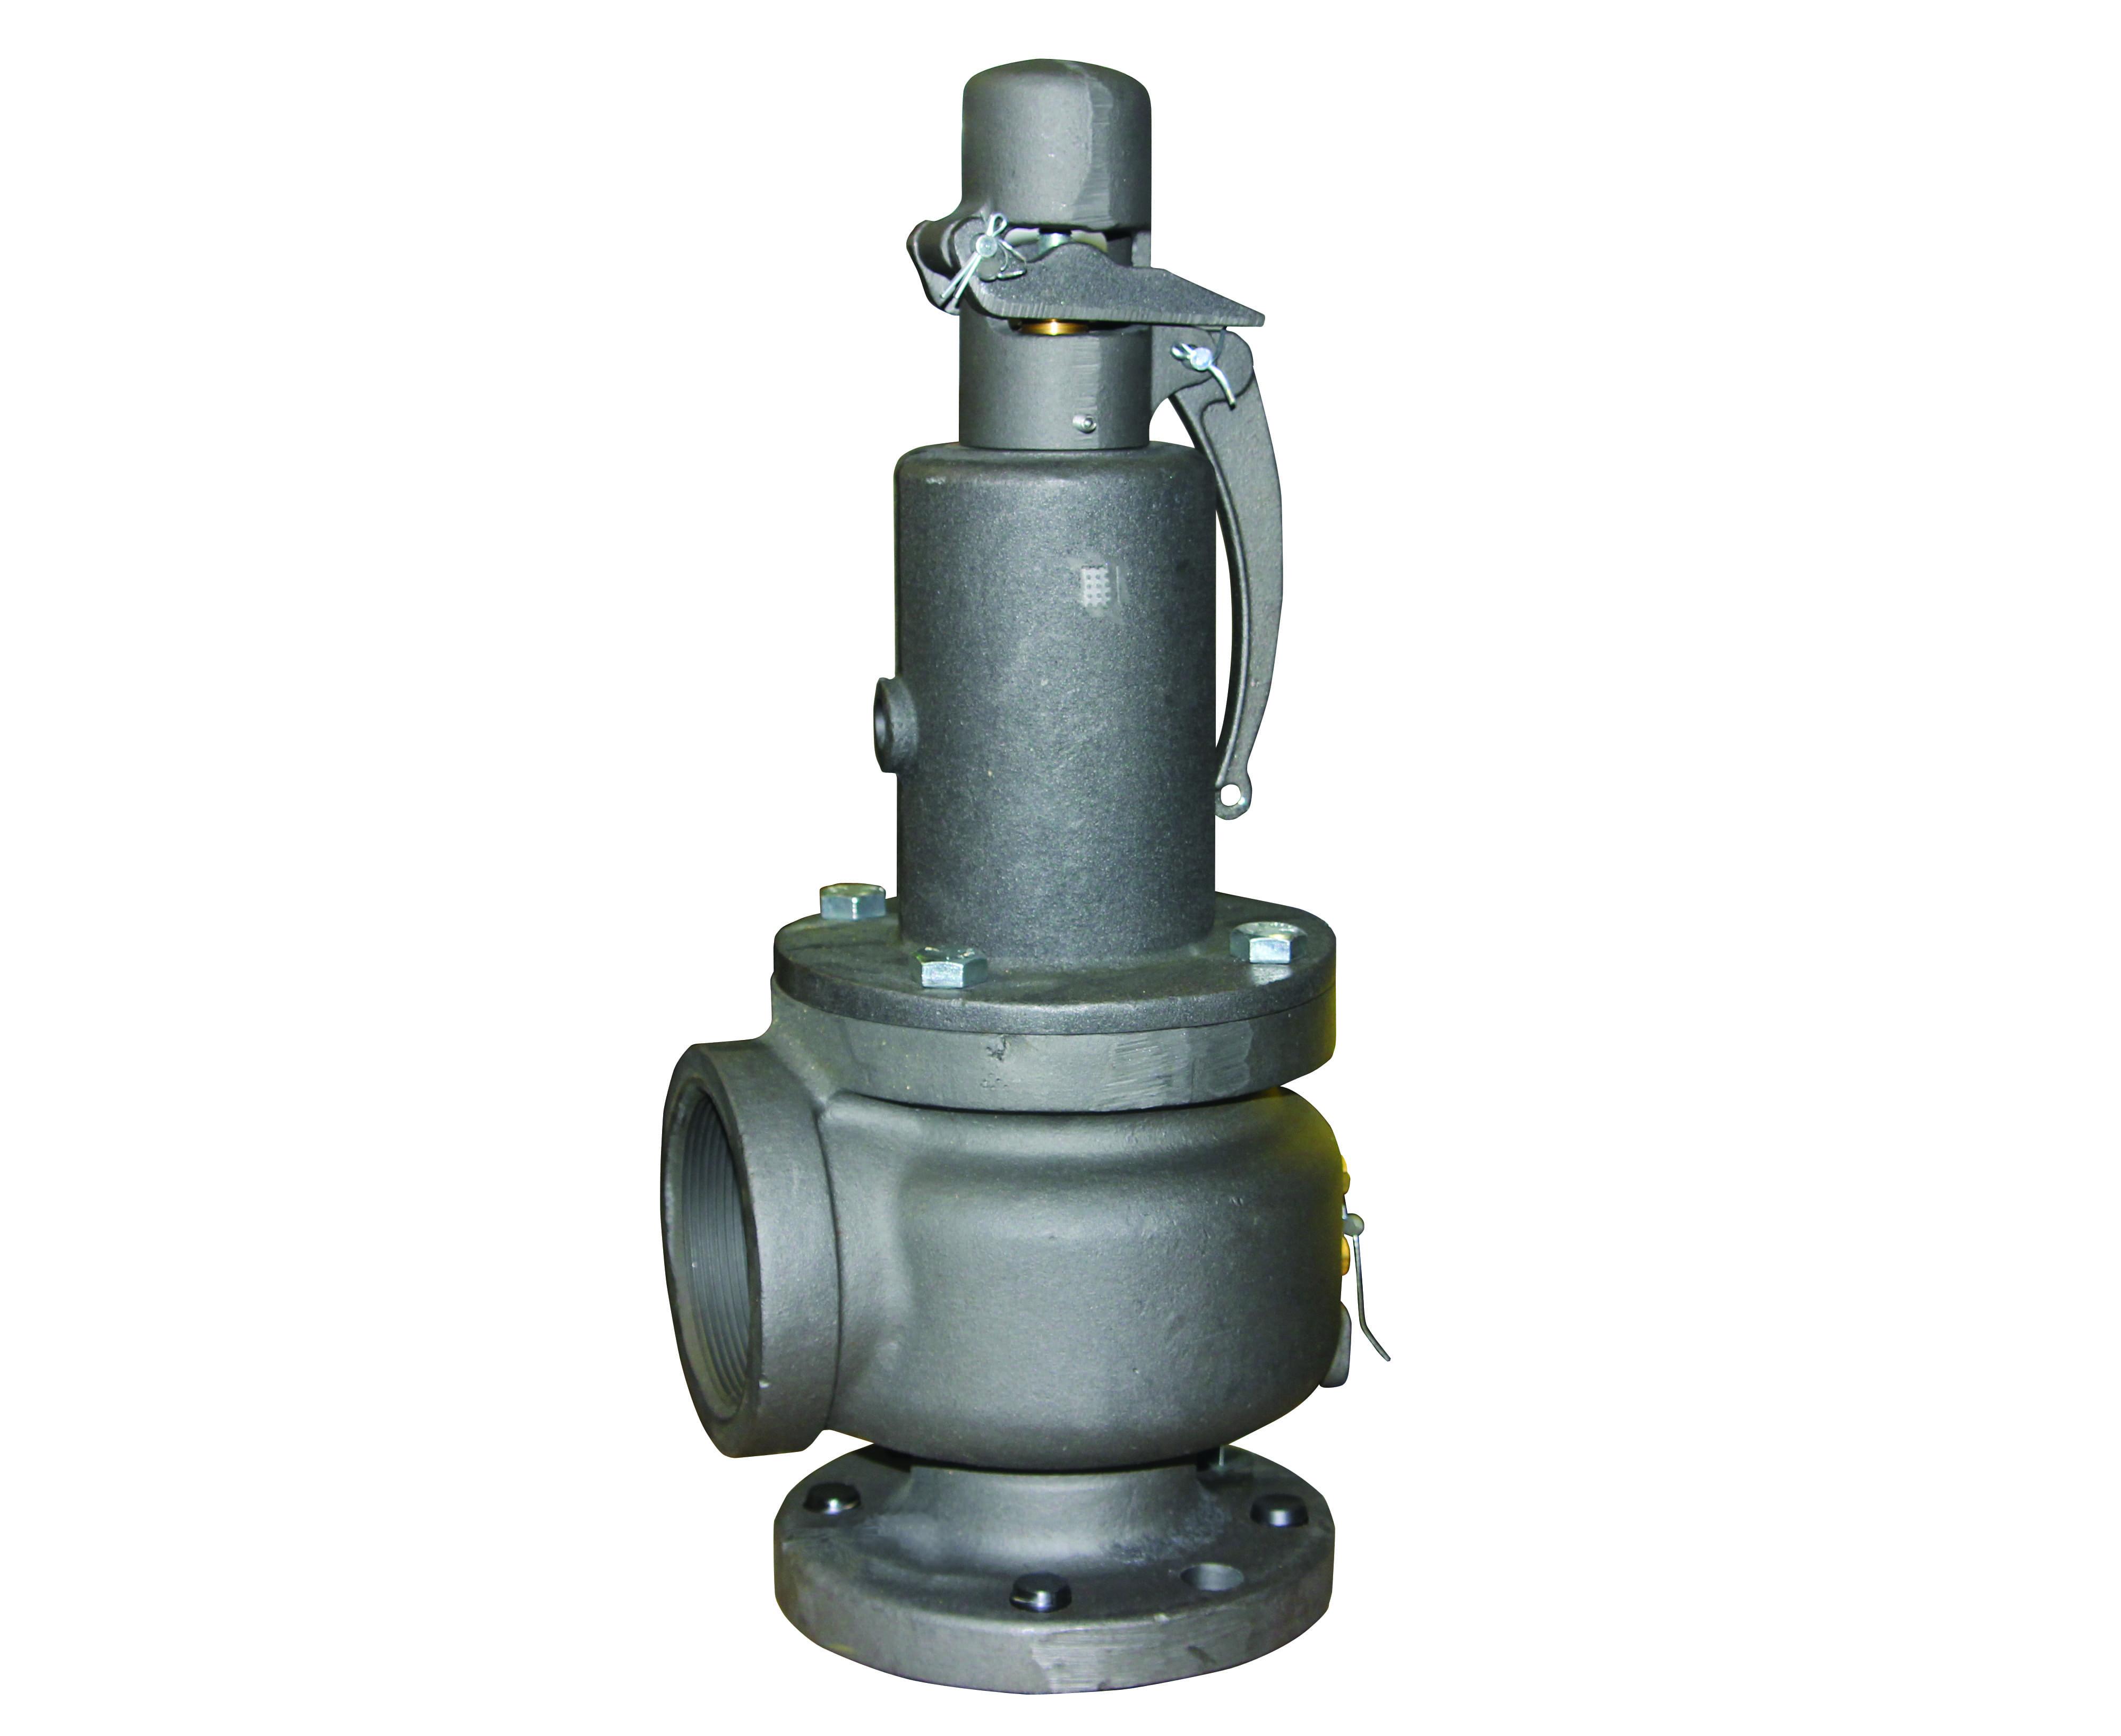 Preview image for Apollo ASME Section I Steam Cast Iron Safety Relief Valve, 2-1/2" X 4" (2 x FNPT)